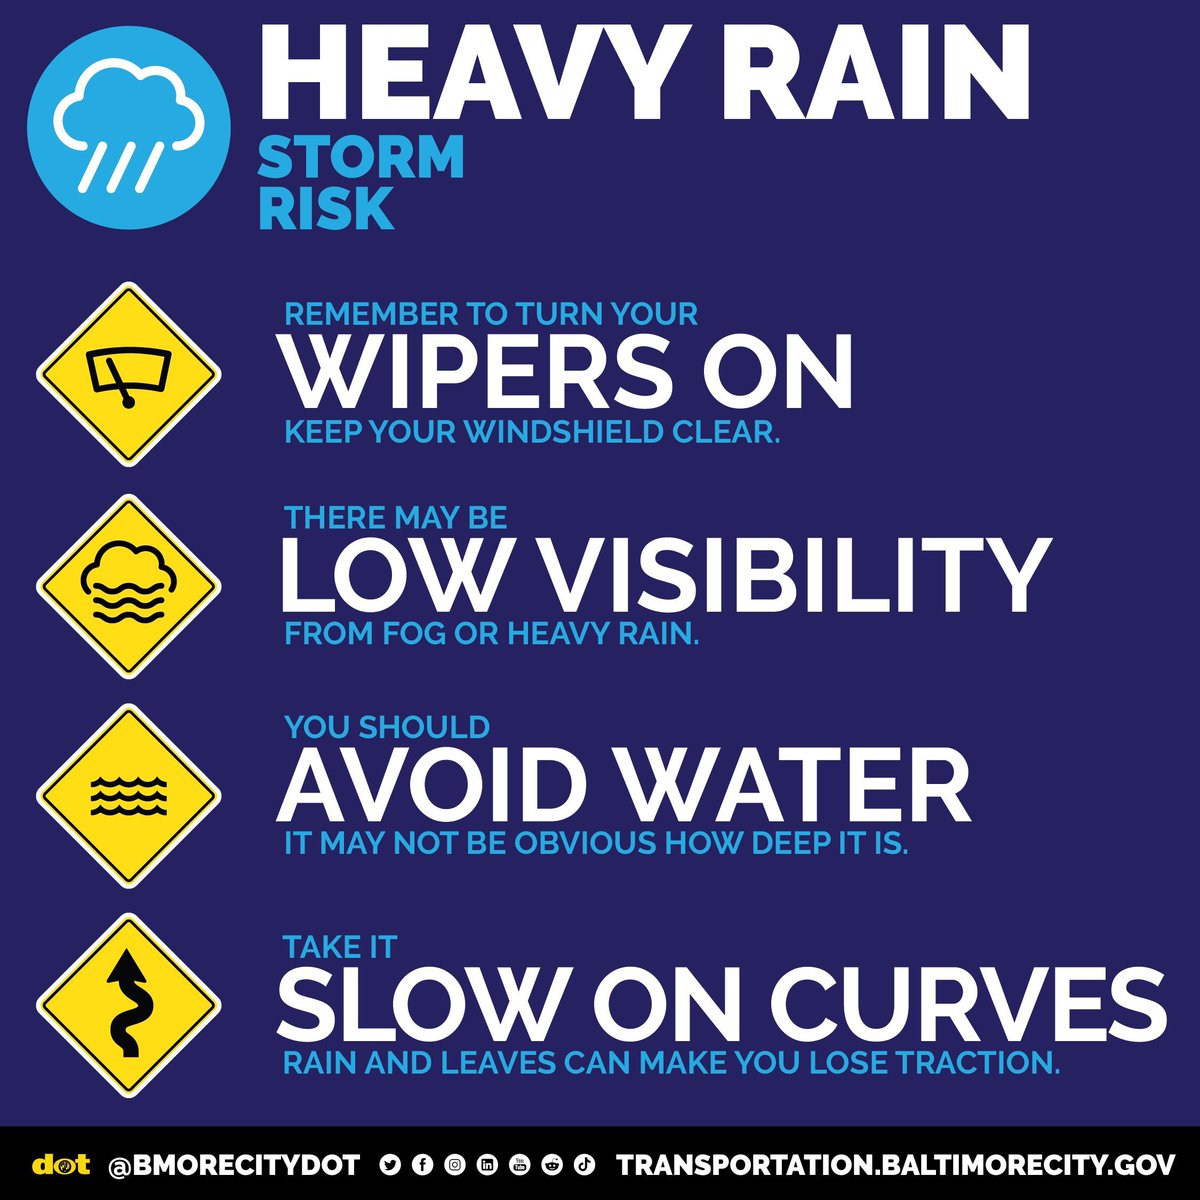 🌧️ Heavy Rain Storm Warning today and tomorrow. 💧 Remember to turn your wipers on. 👁️ Keep your windshield clear. 🌫️ There may be low visibility from fog or heavy rain. 🌊 You should avoid water, it may not be obvious how deep it is. ⤴️ Take it slow on curves.